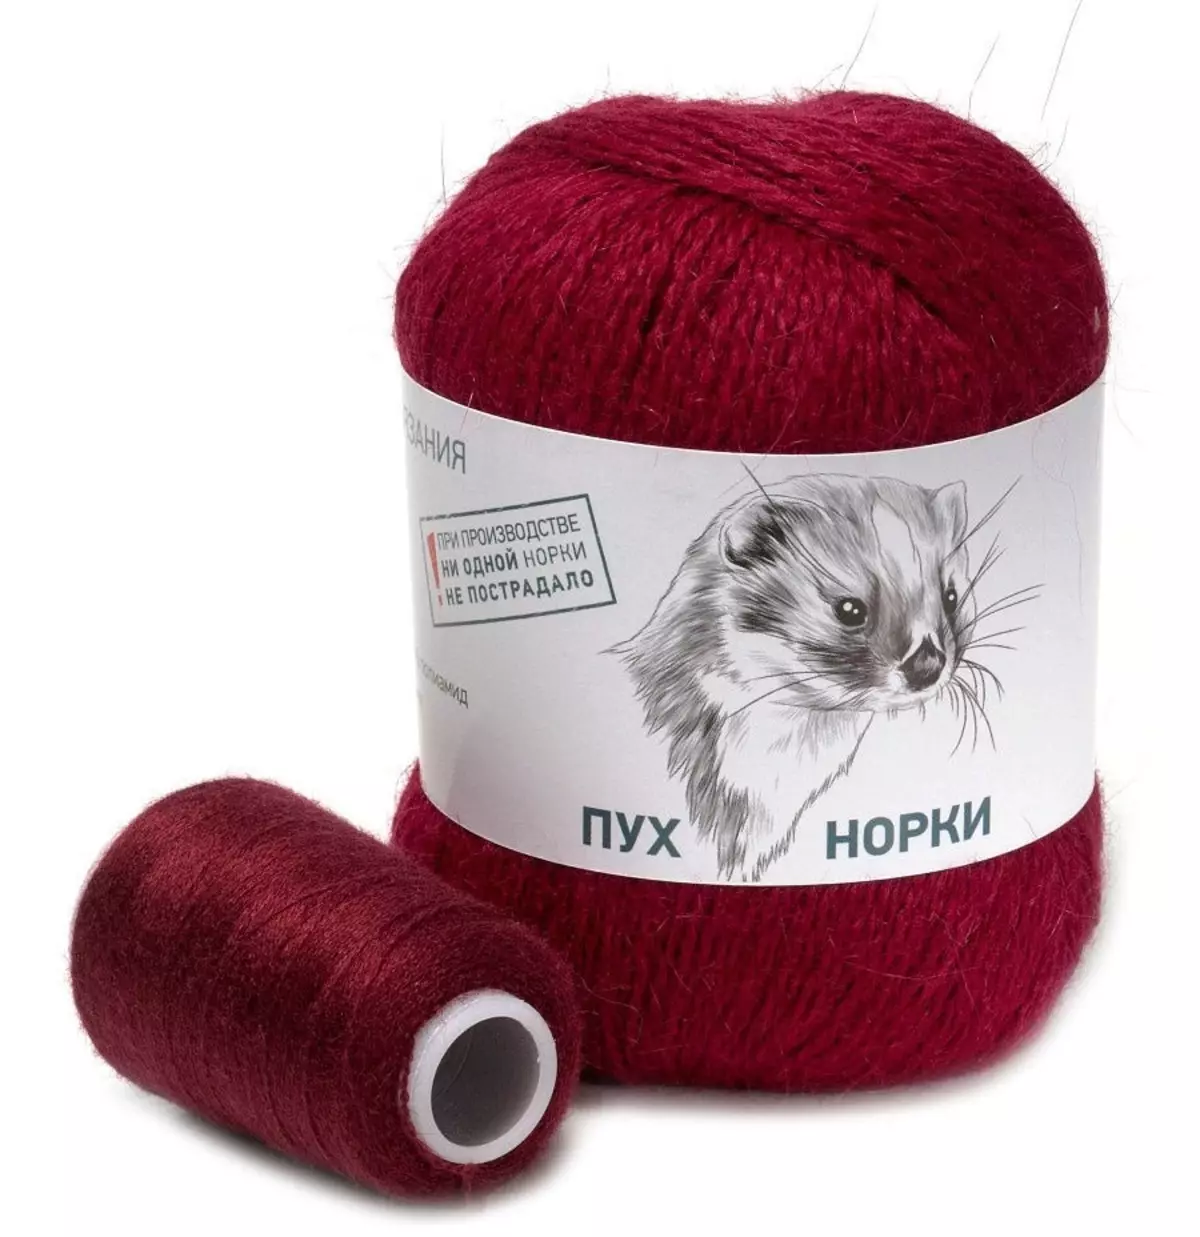 Mink fluff yarn: composition and palette of martial yarn for knitting. What makes it? Fluffy yarn products from mink fur. Customer Reviews 6703_8